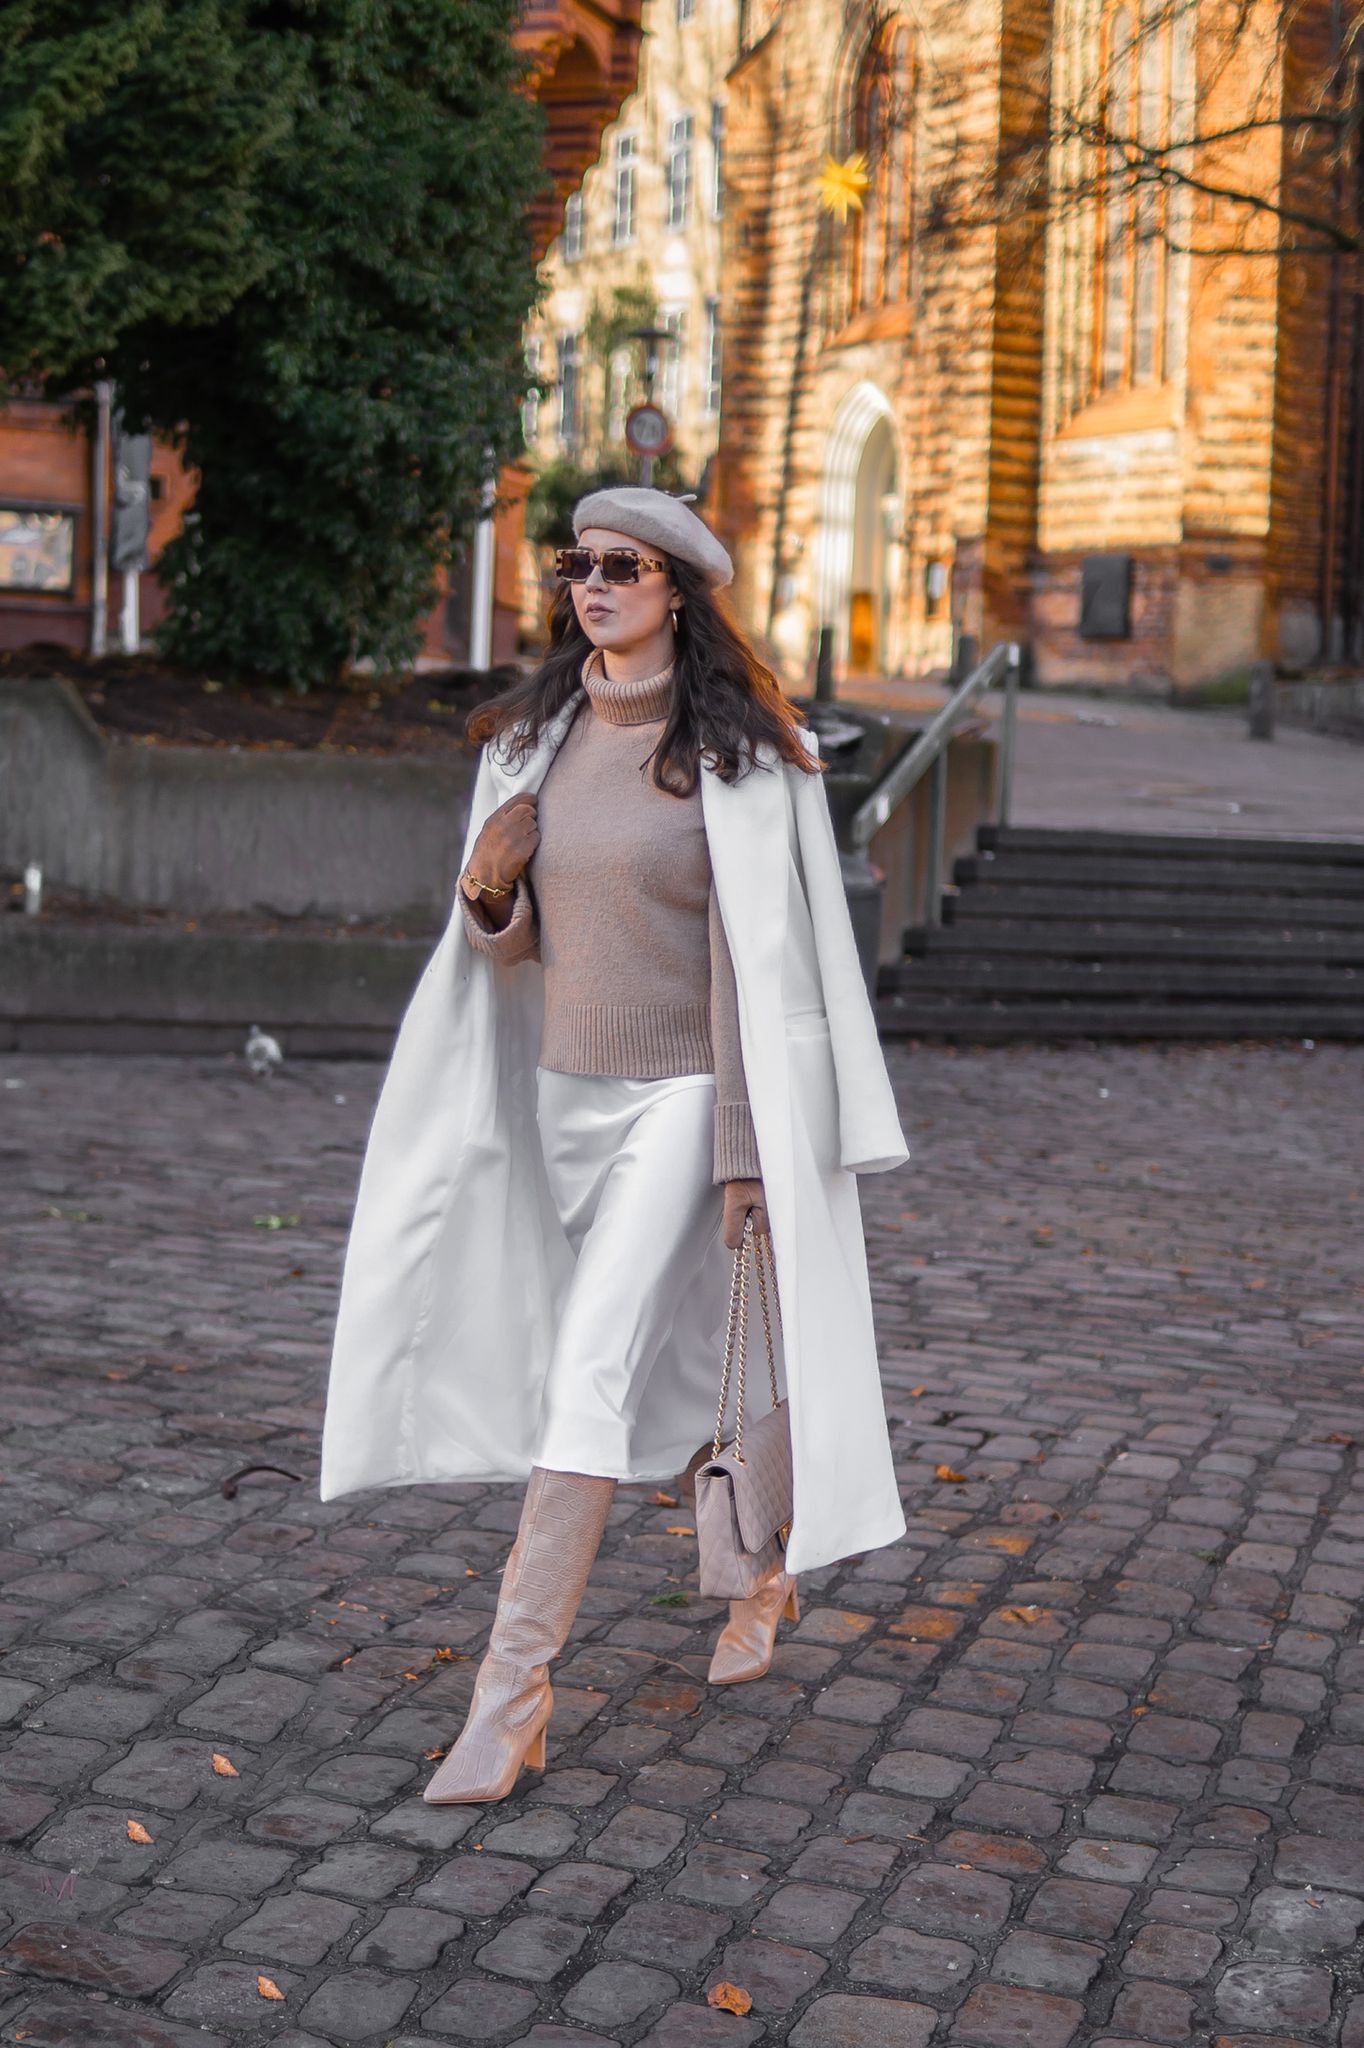 3 White Satin Skirt Outfit Ideas You Can Copy